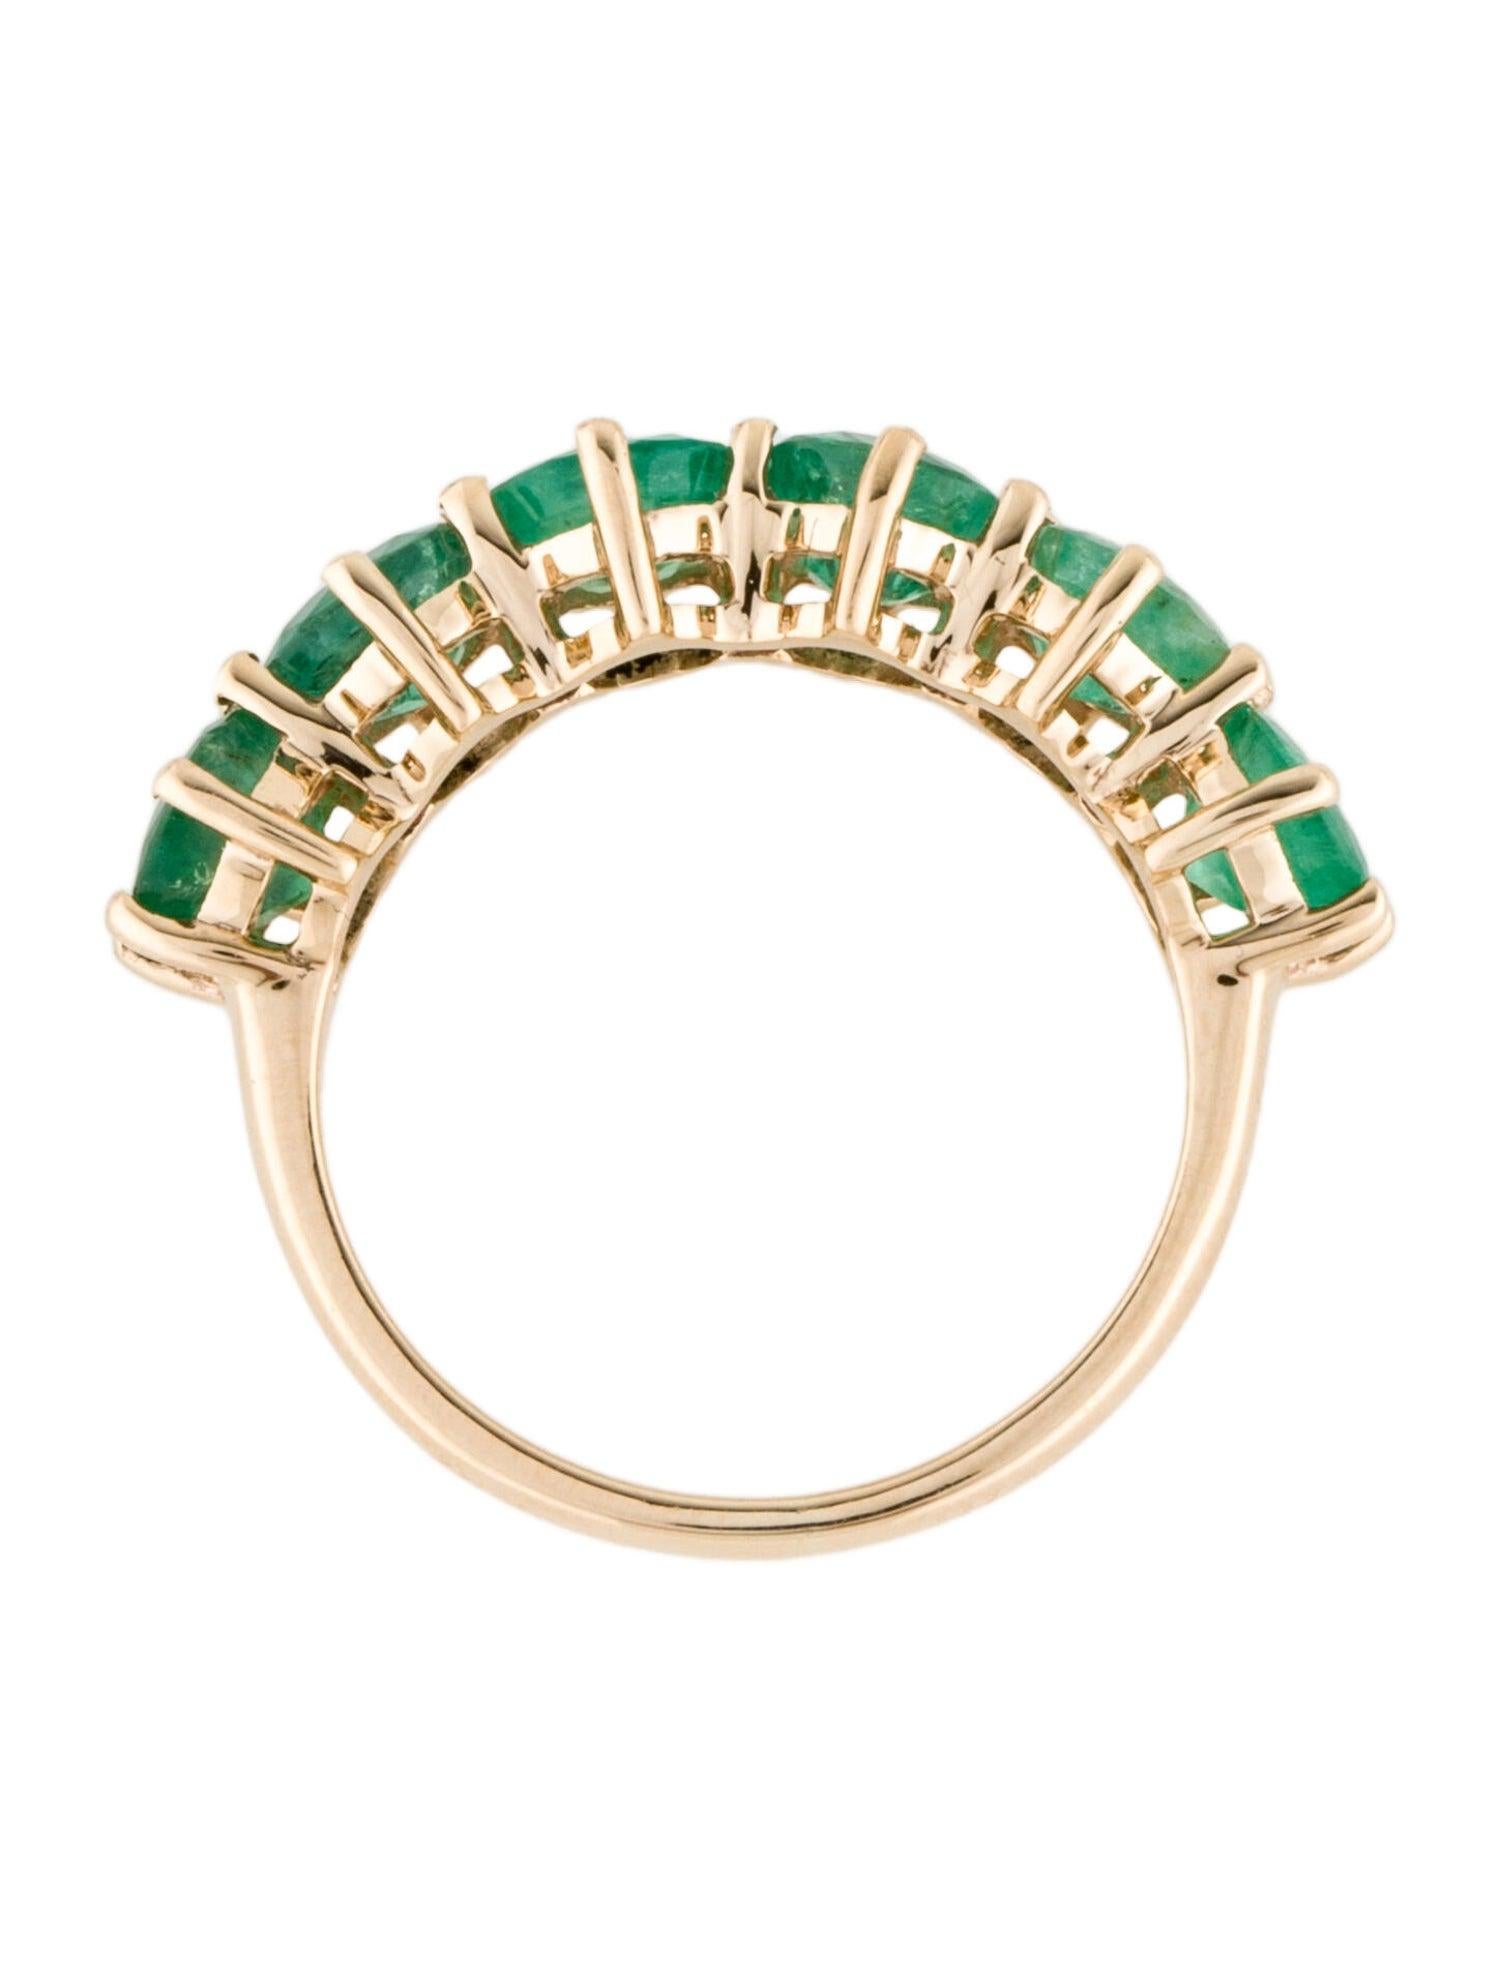 14K Emerald Band Ring 2.29ctw - Size 6.75 - Timeless Elegance, Luxurious Design In New Condition For Sale In Holtsville, NY